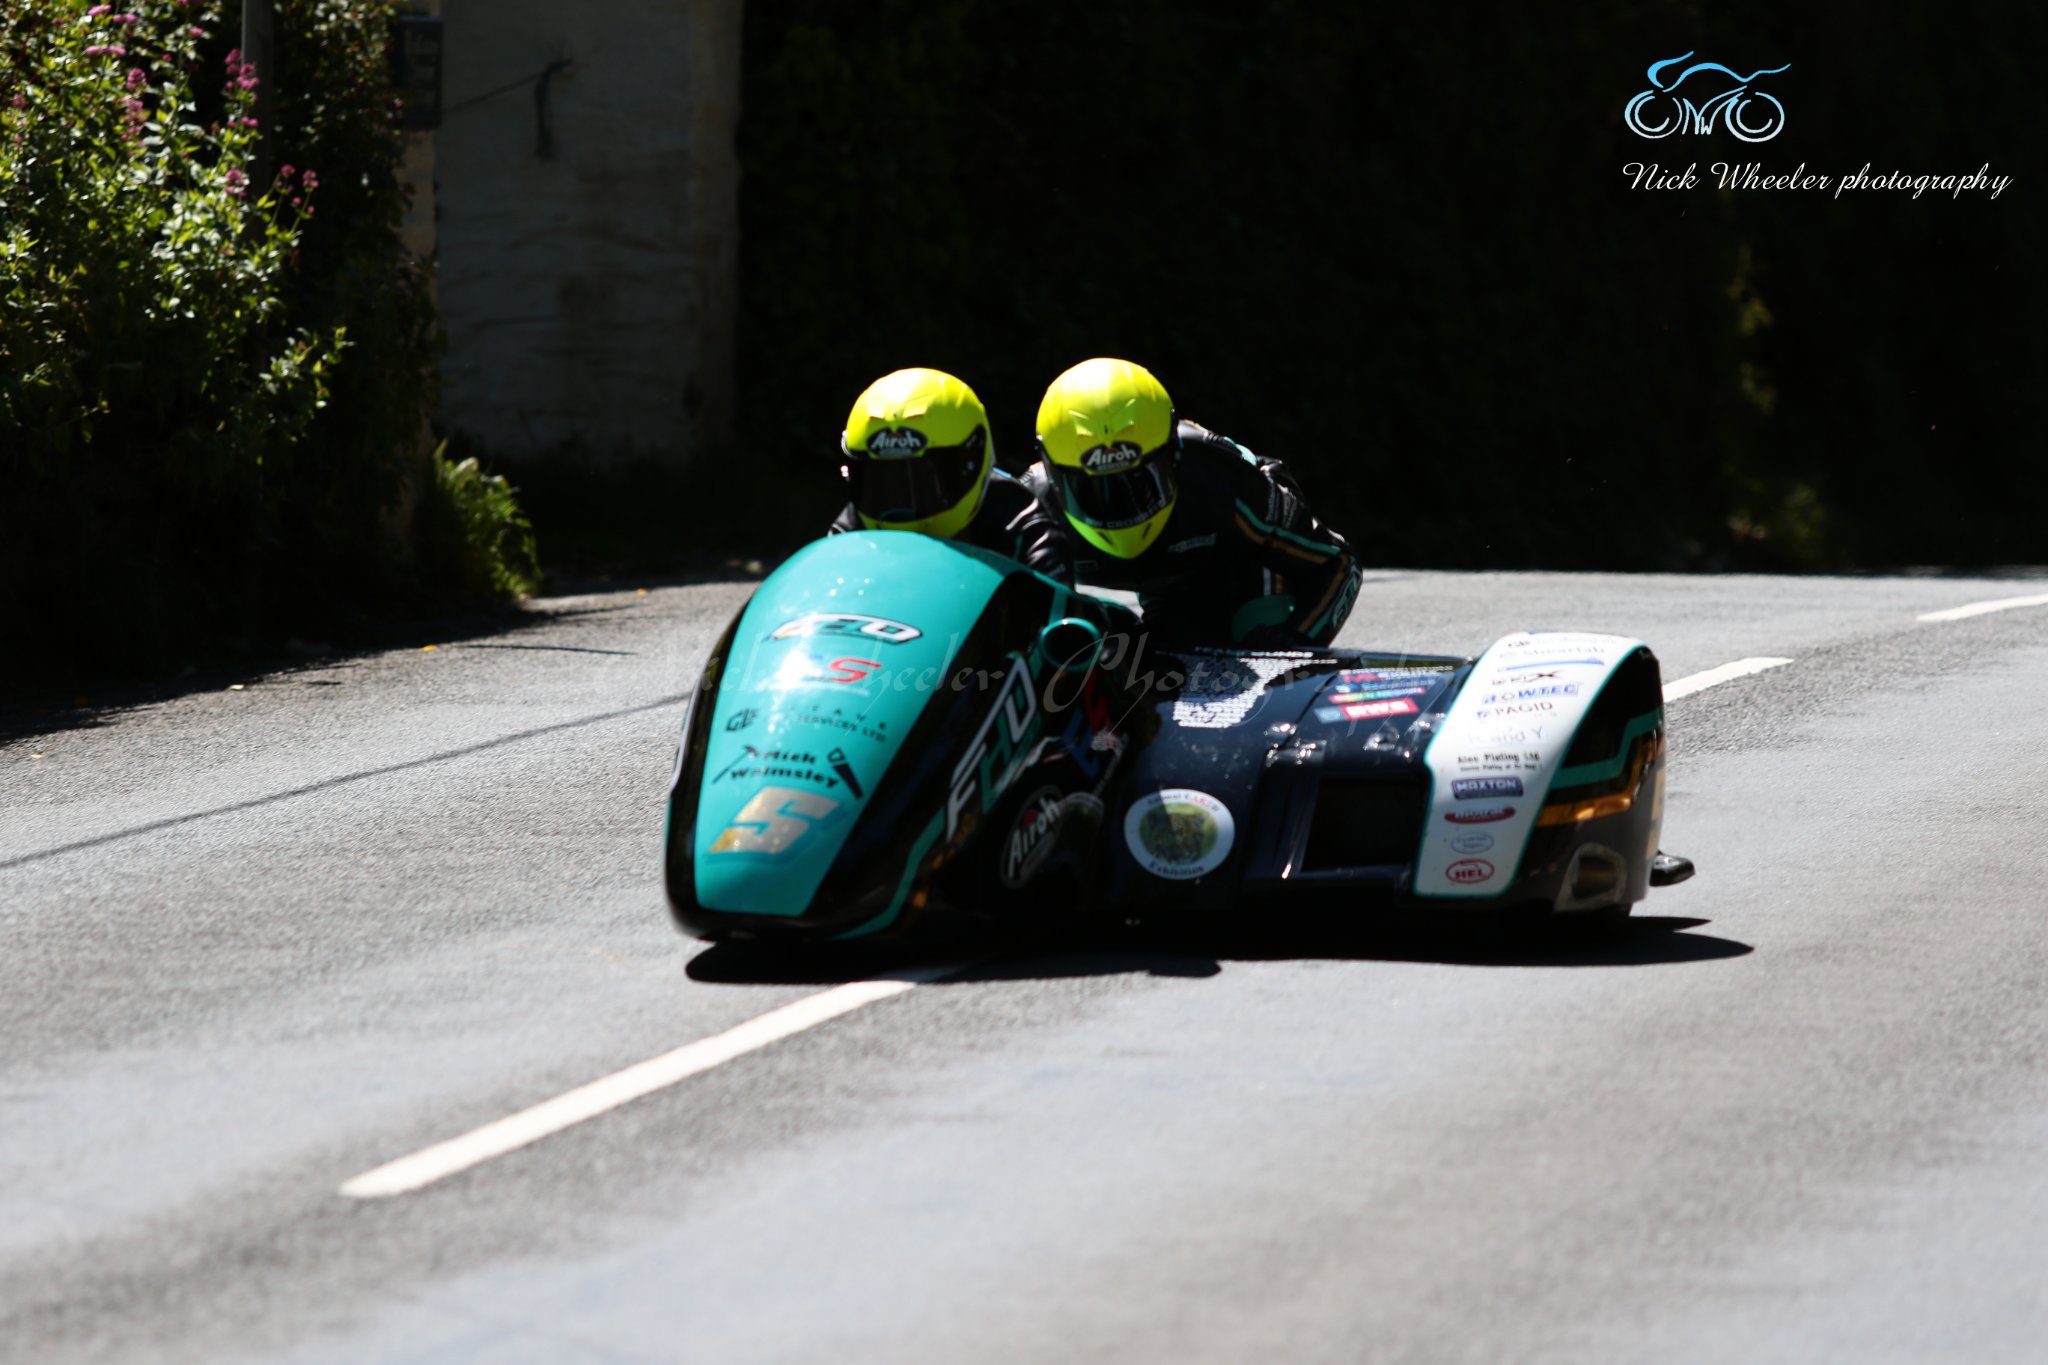 TT 2022: Founds/Walmsley Take Opening Sidecar Practice Spoils